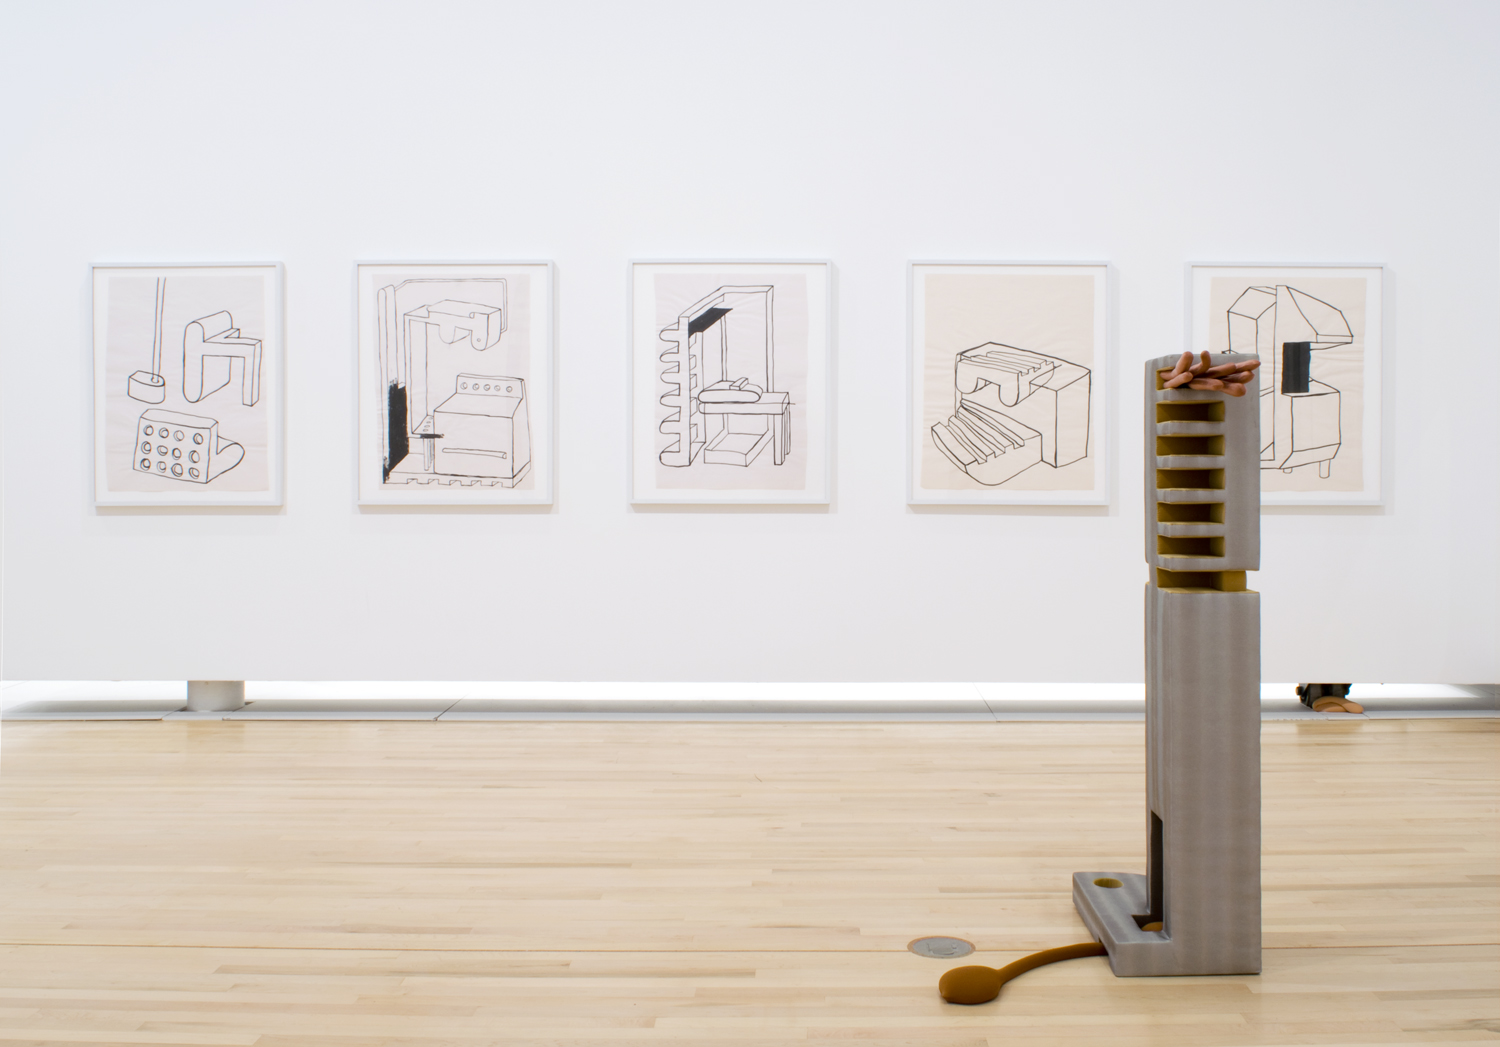   Components , 2011–2012, fabric, and  Hypothetical Forms , 2013, ink on paper  Ideas and Things, 2015, Kamloops Art Gallery, British Columbia 